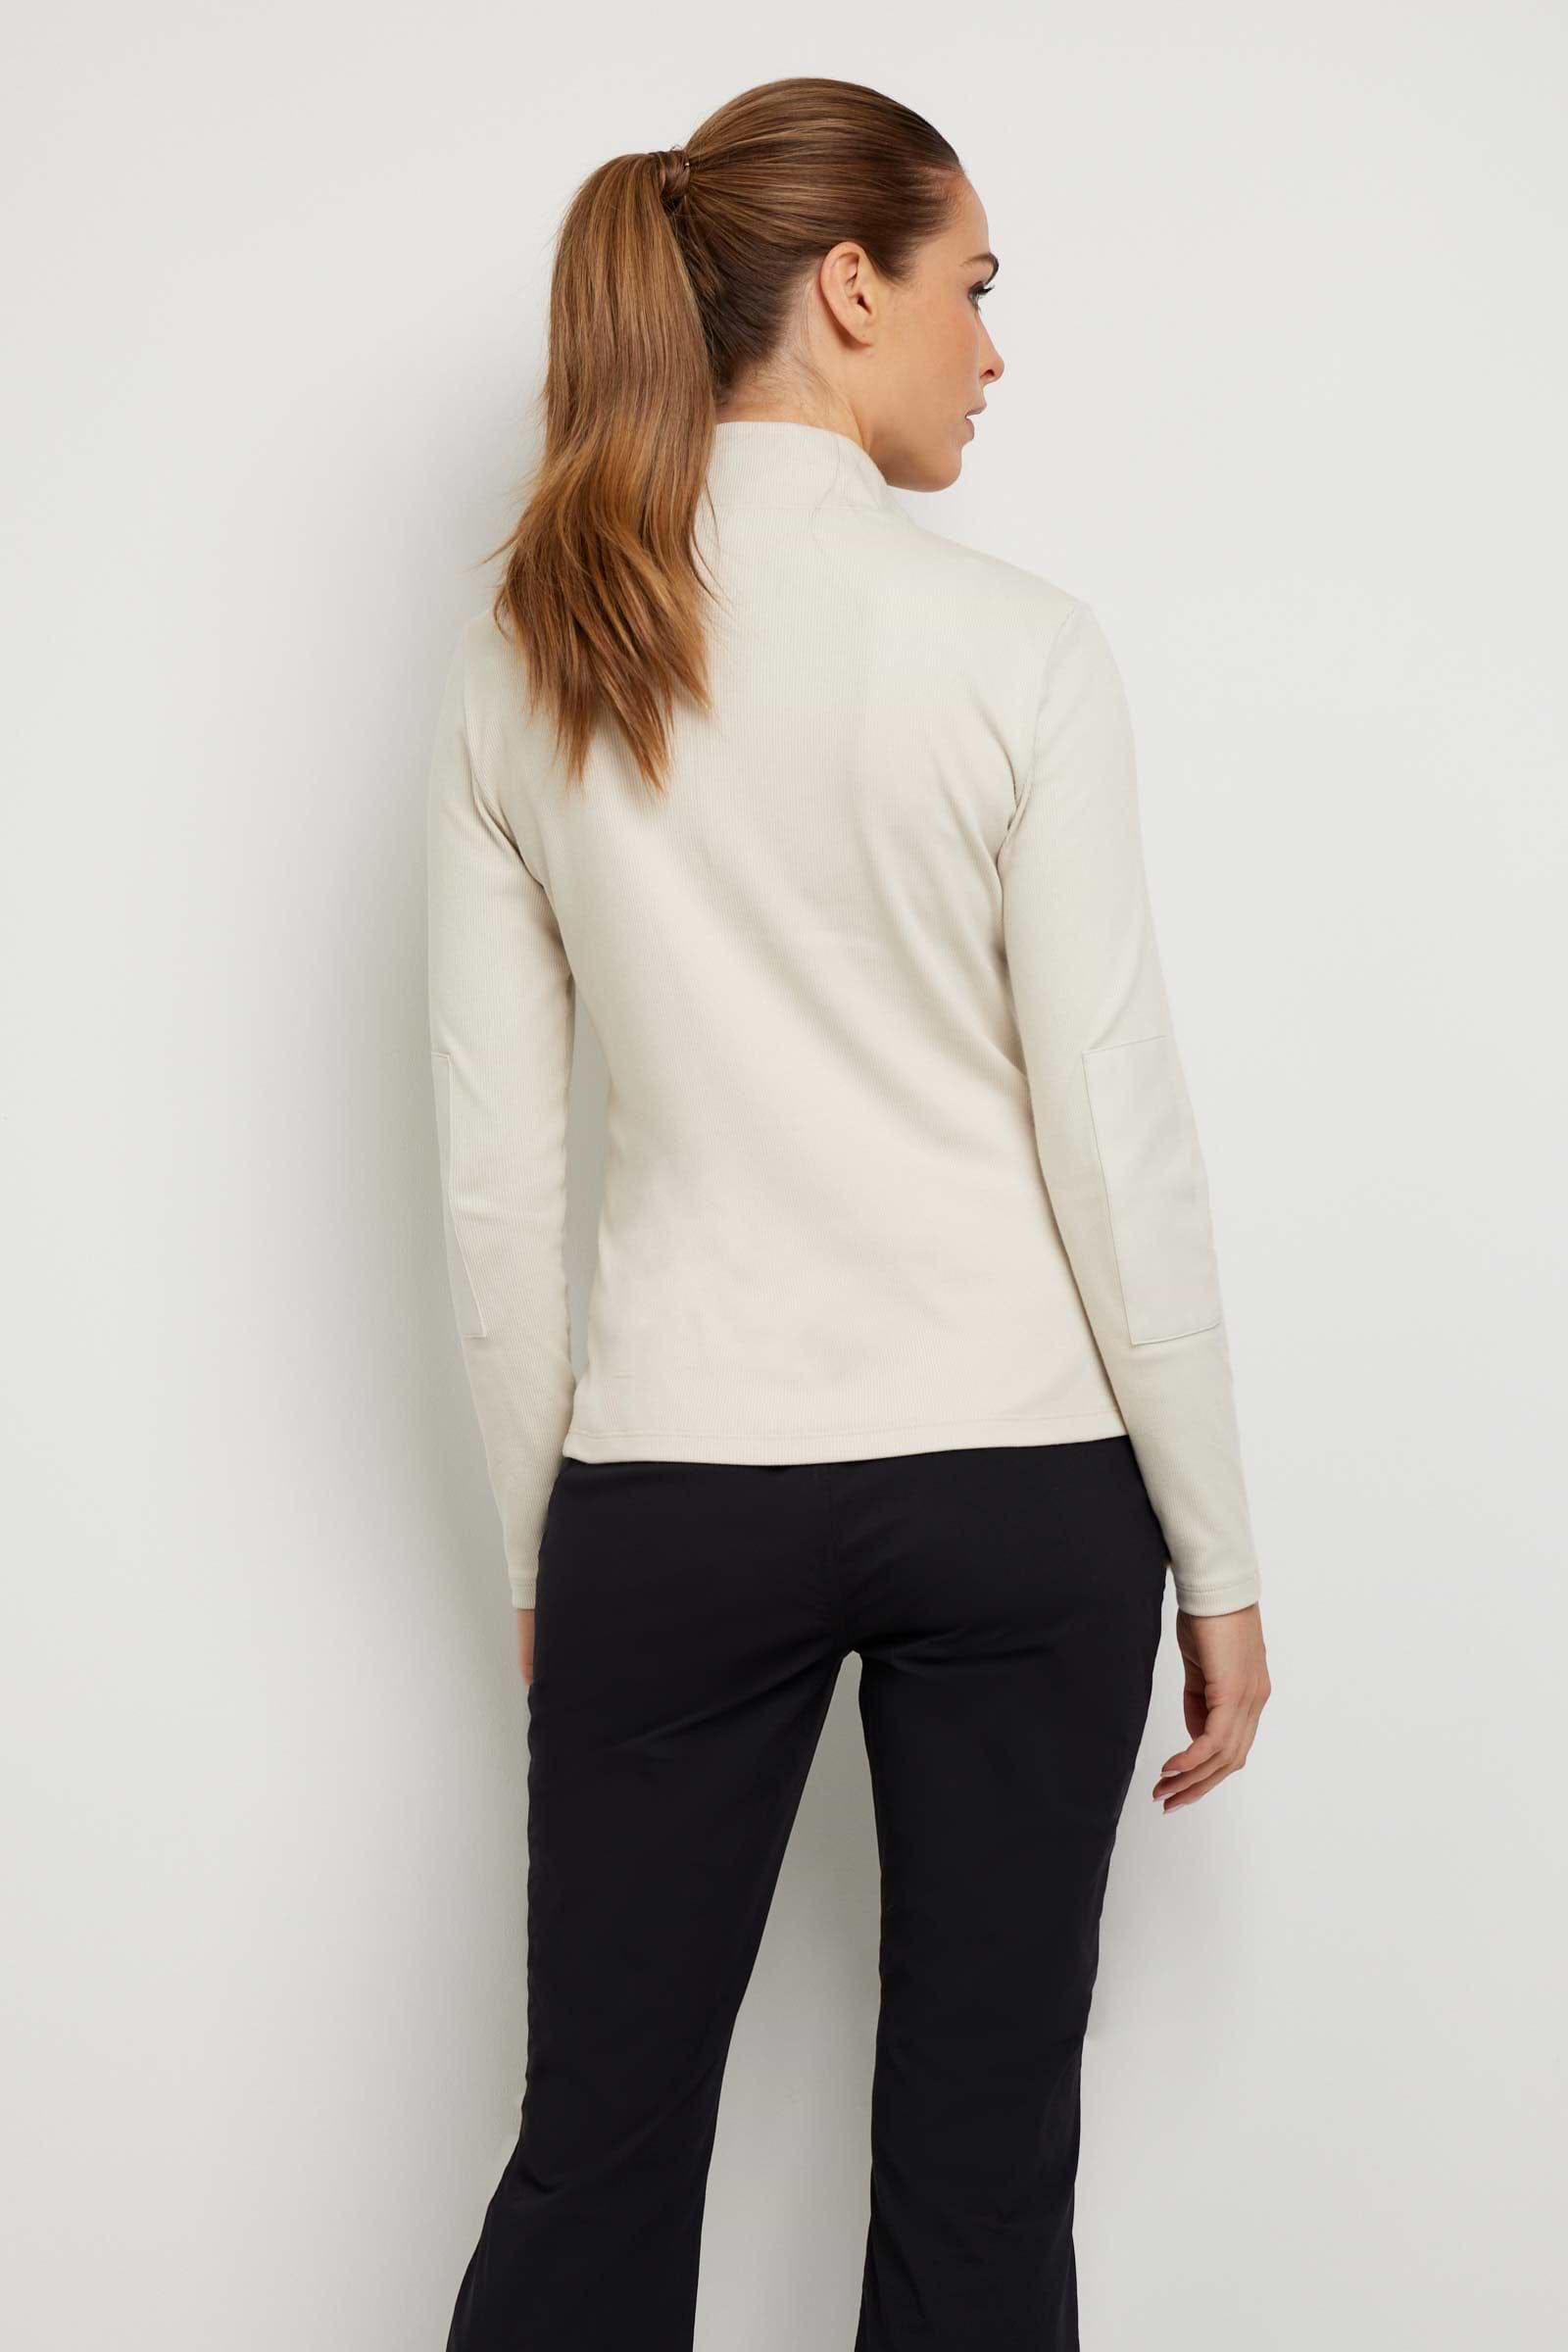 The Best Travel Top. Woman Showing the Back Profile of a Monroe Henley Top in Stone.